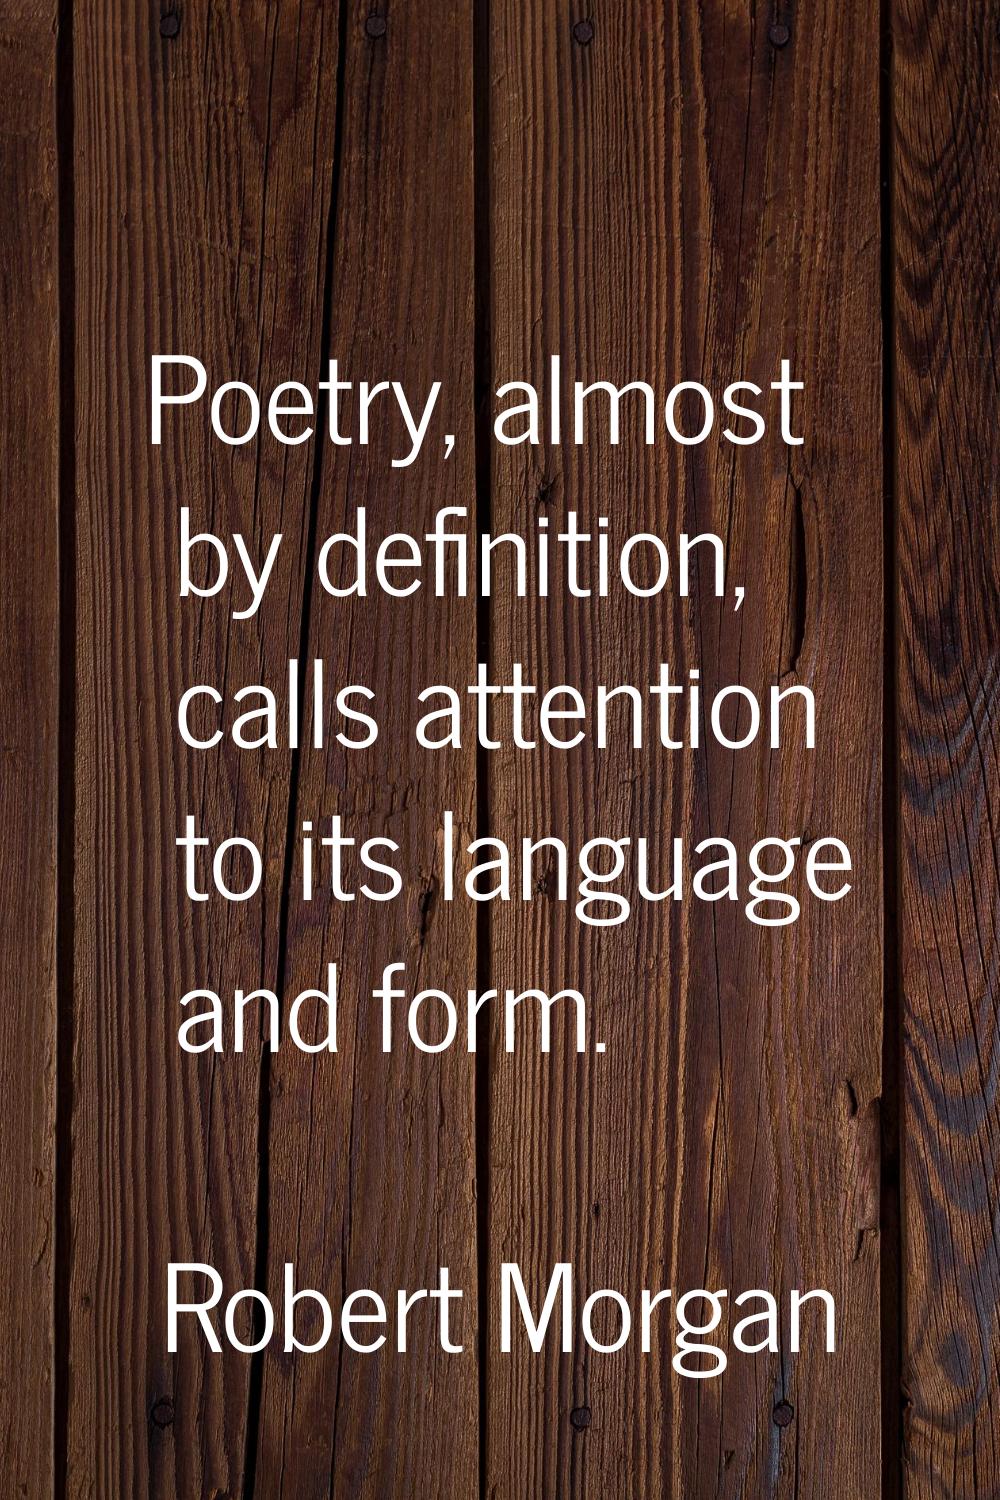 Poetry, almost by definition, calls attention to its language and form.